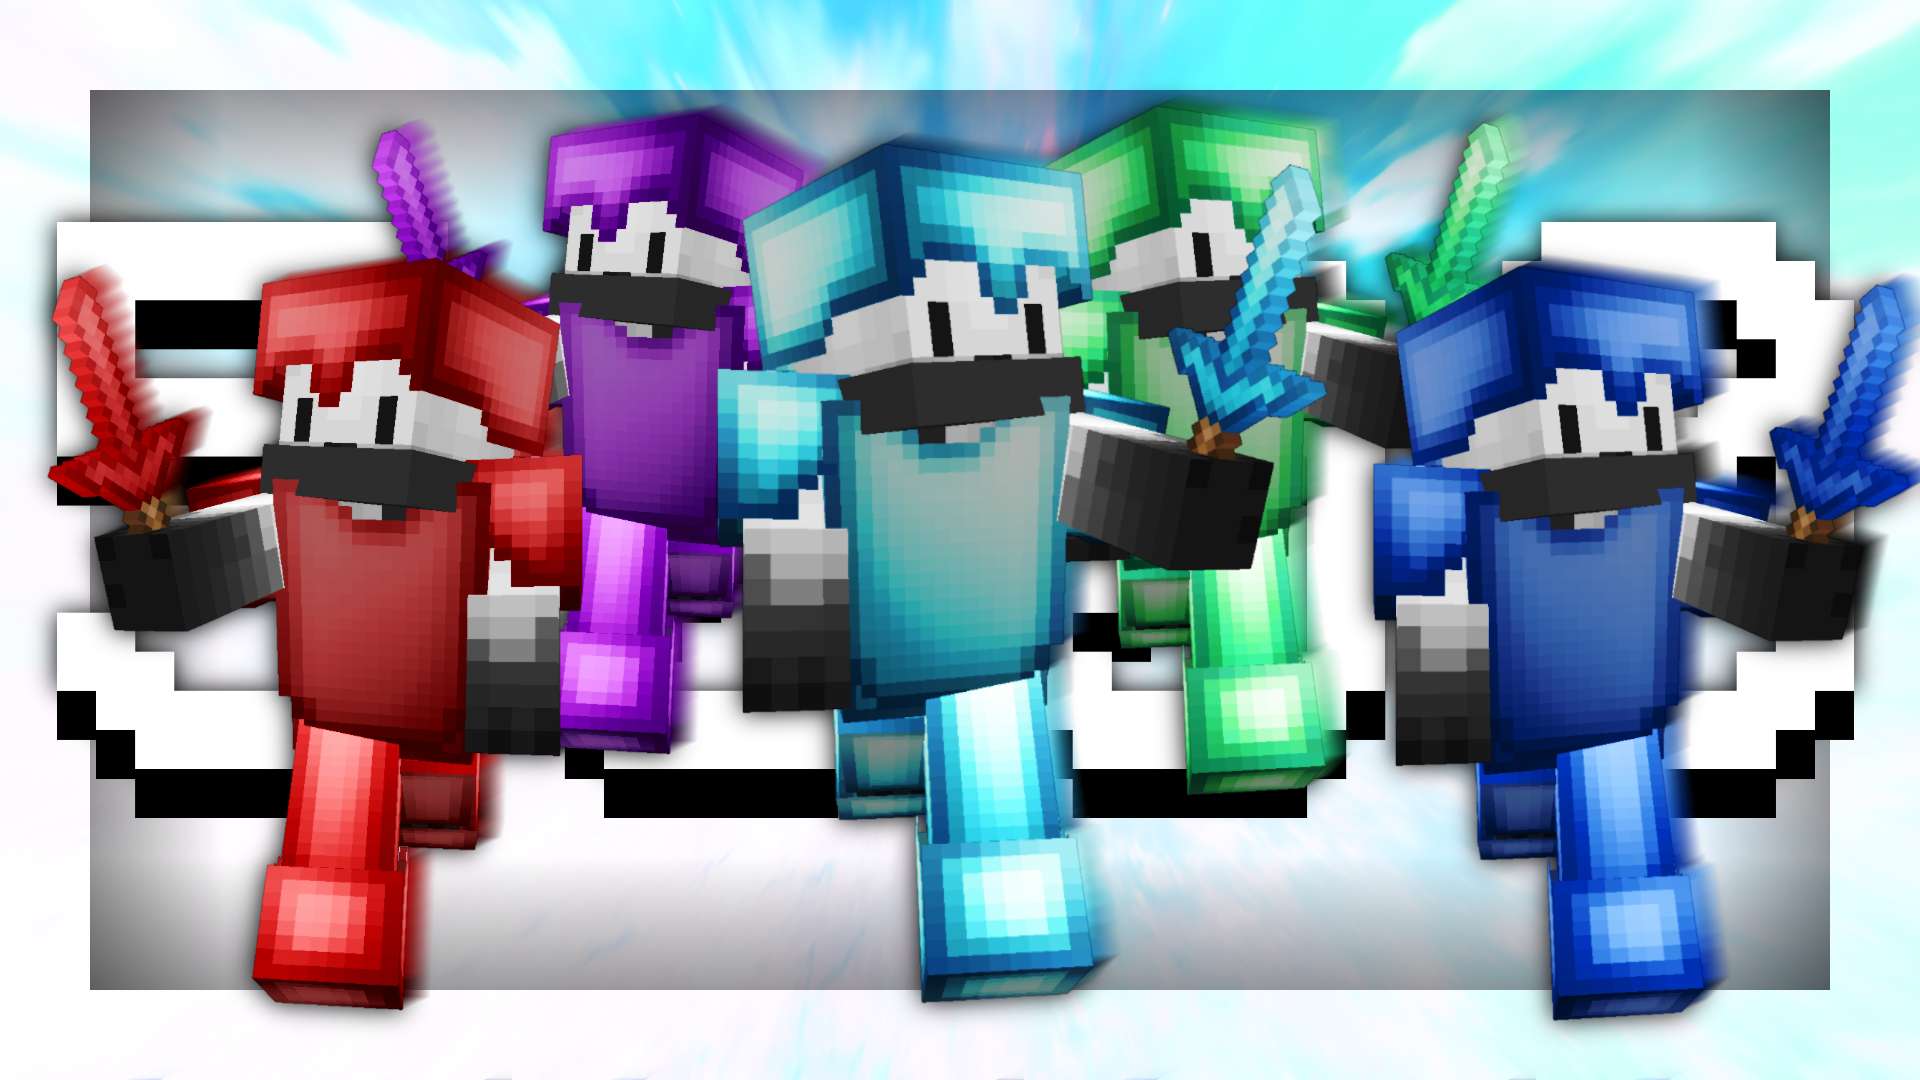 THE BEST BEDWARS PACK 256x by LeviPacks